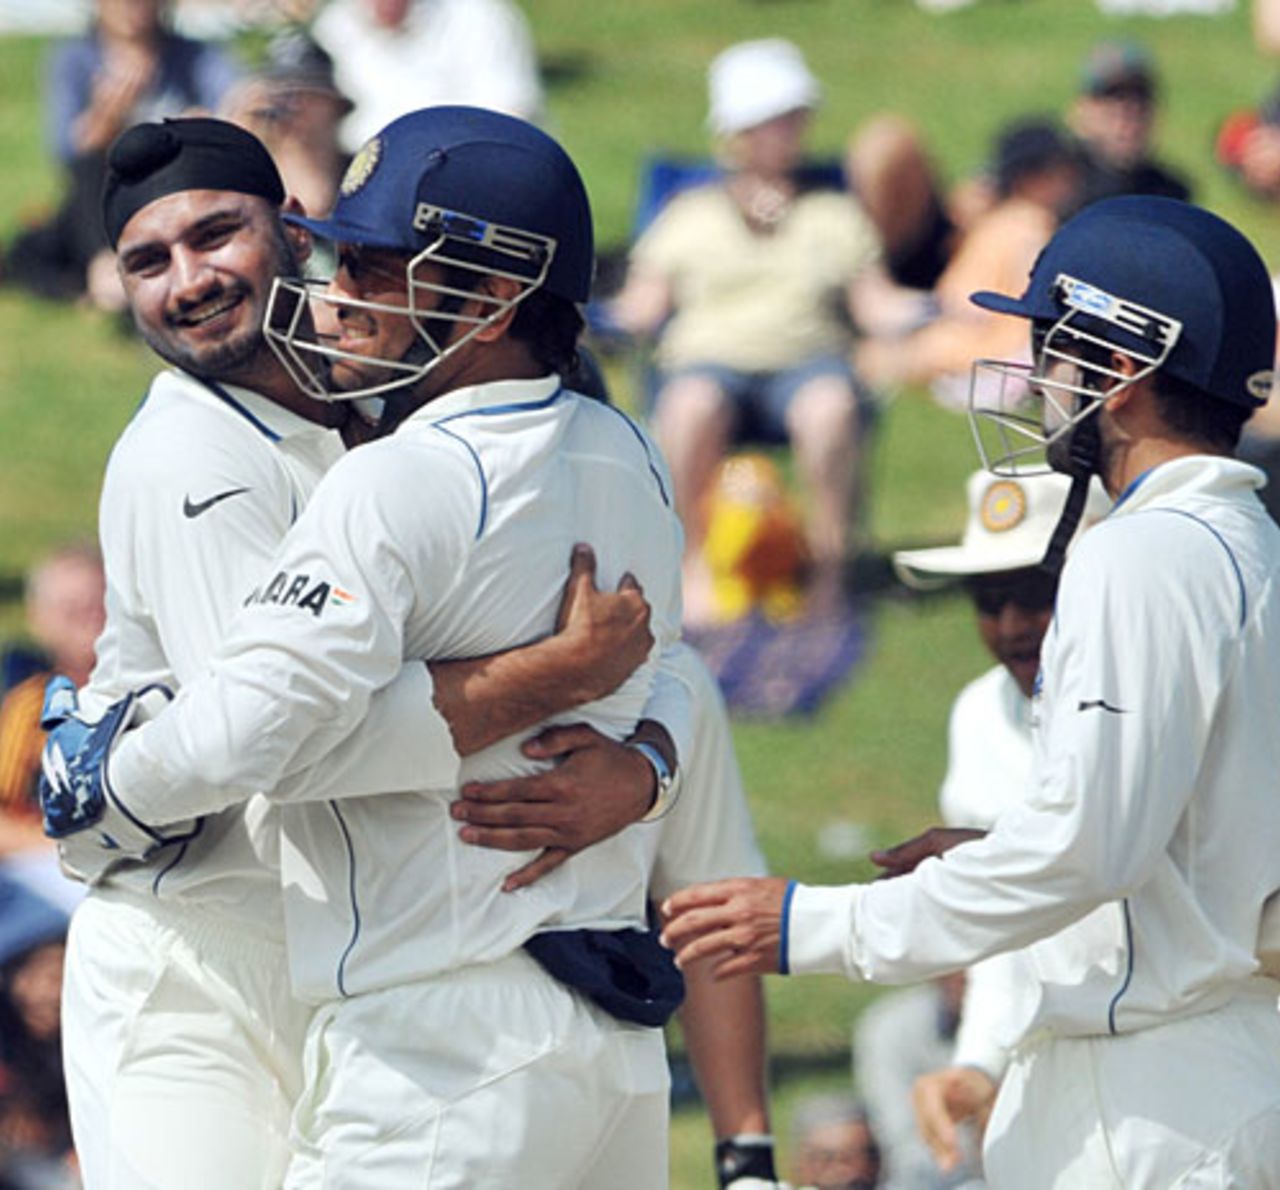 Team-mates congratulate Harbhajan Singh for a wicket, New Zealand v India, 1st Test, Hamilton, 4th day, March 21, 2009